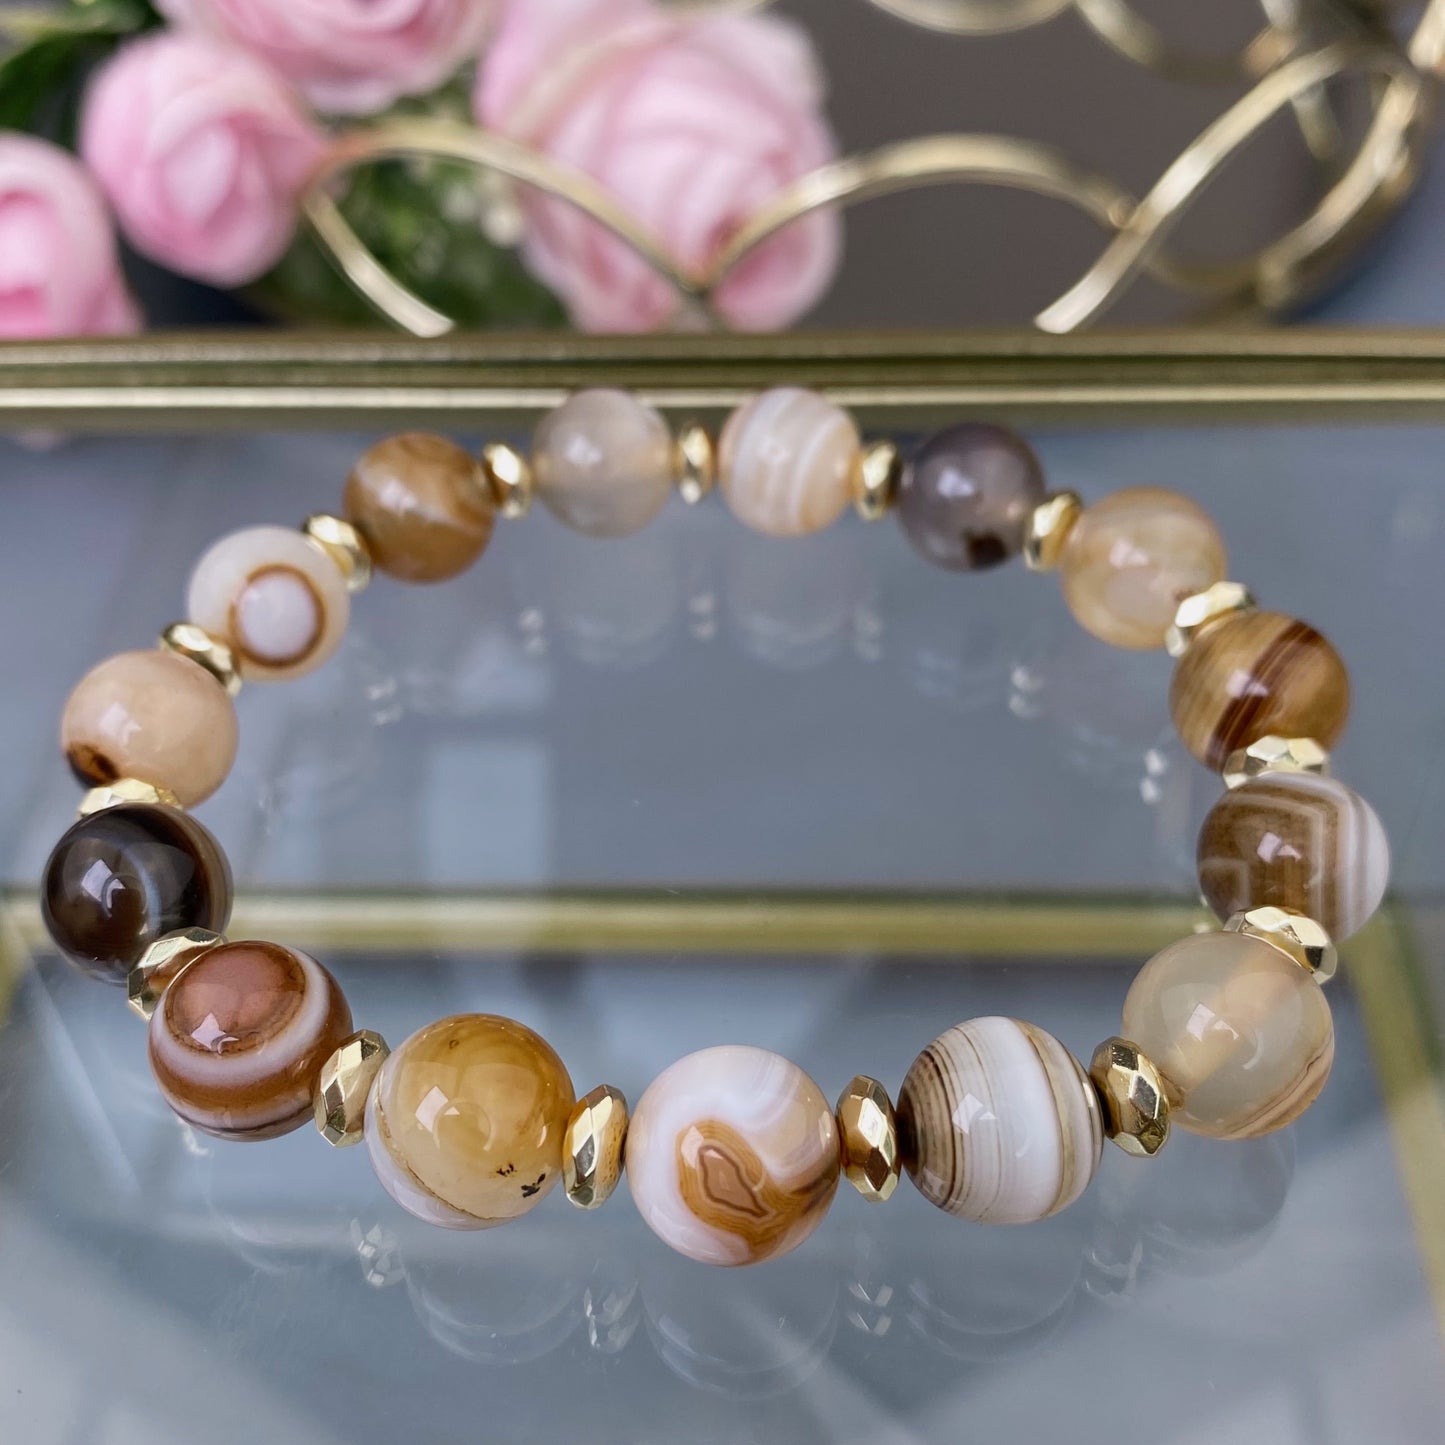 Agate bracelet with decorative elements (Agate, 10mm)